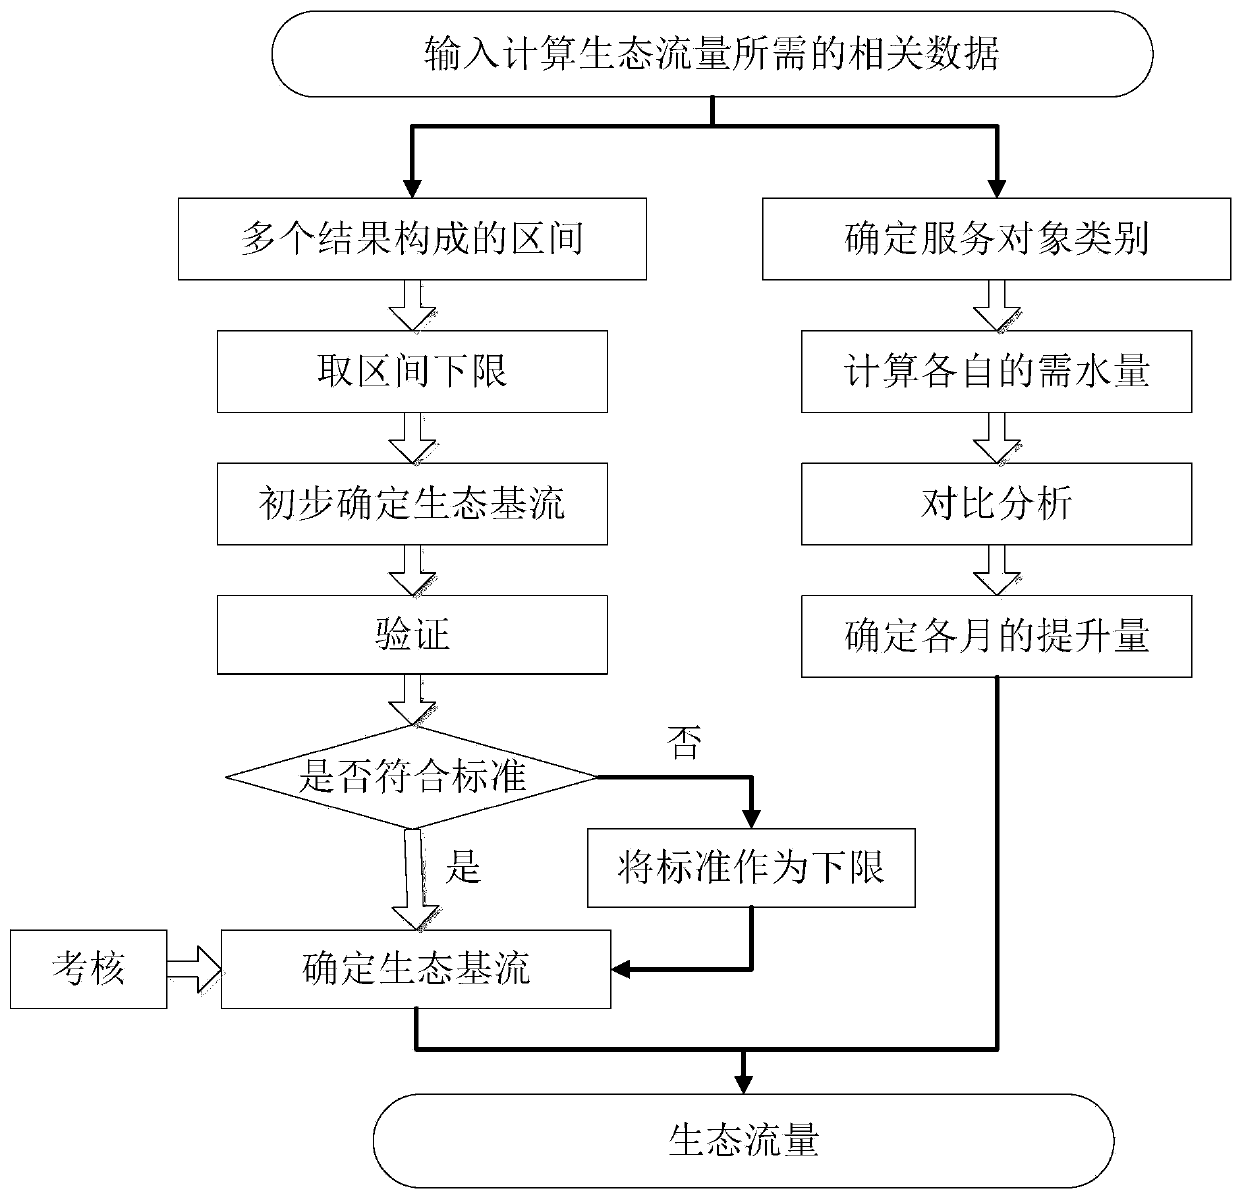 Ecological flow determination method considering lifting amount